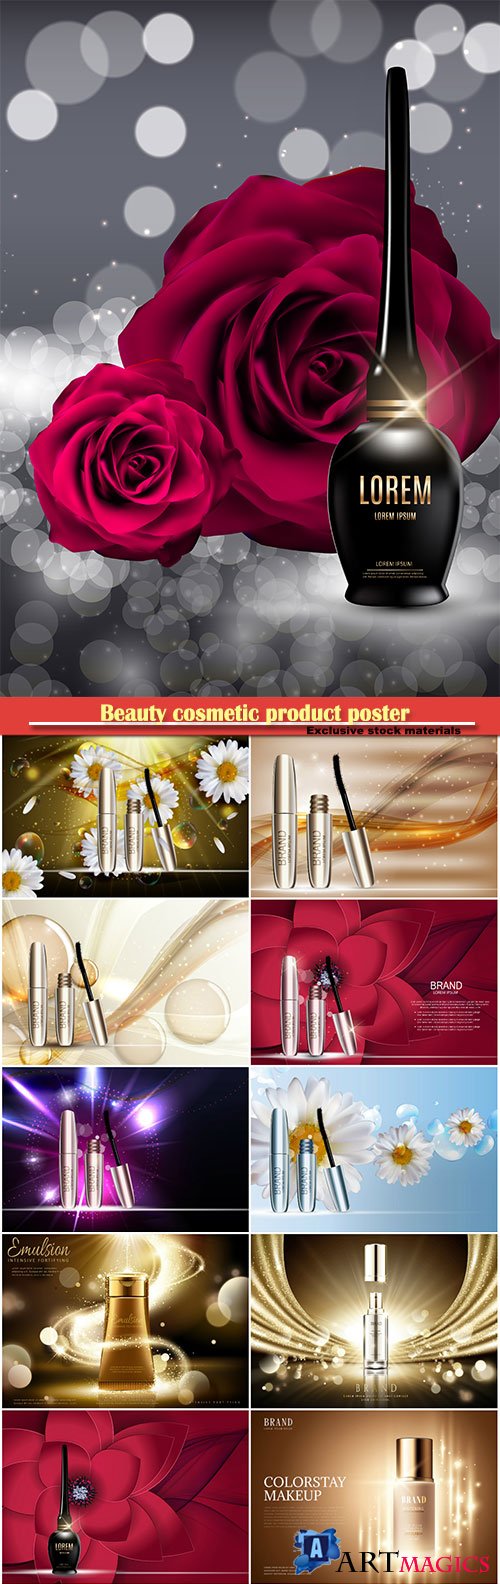 Beauty cosmetic product poster, fashion design makeup cosmetics, background in 3d illustration